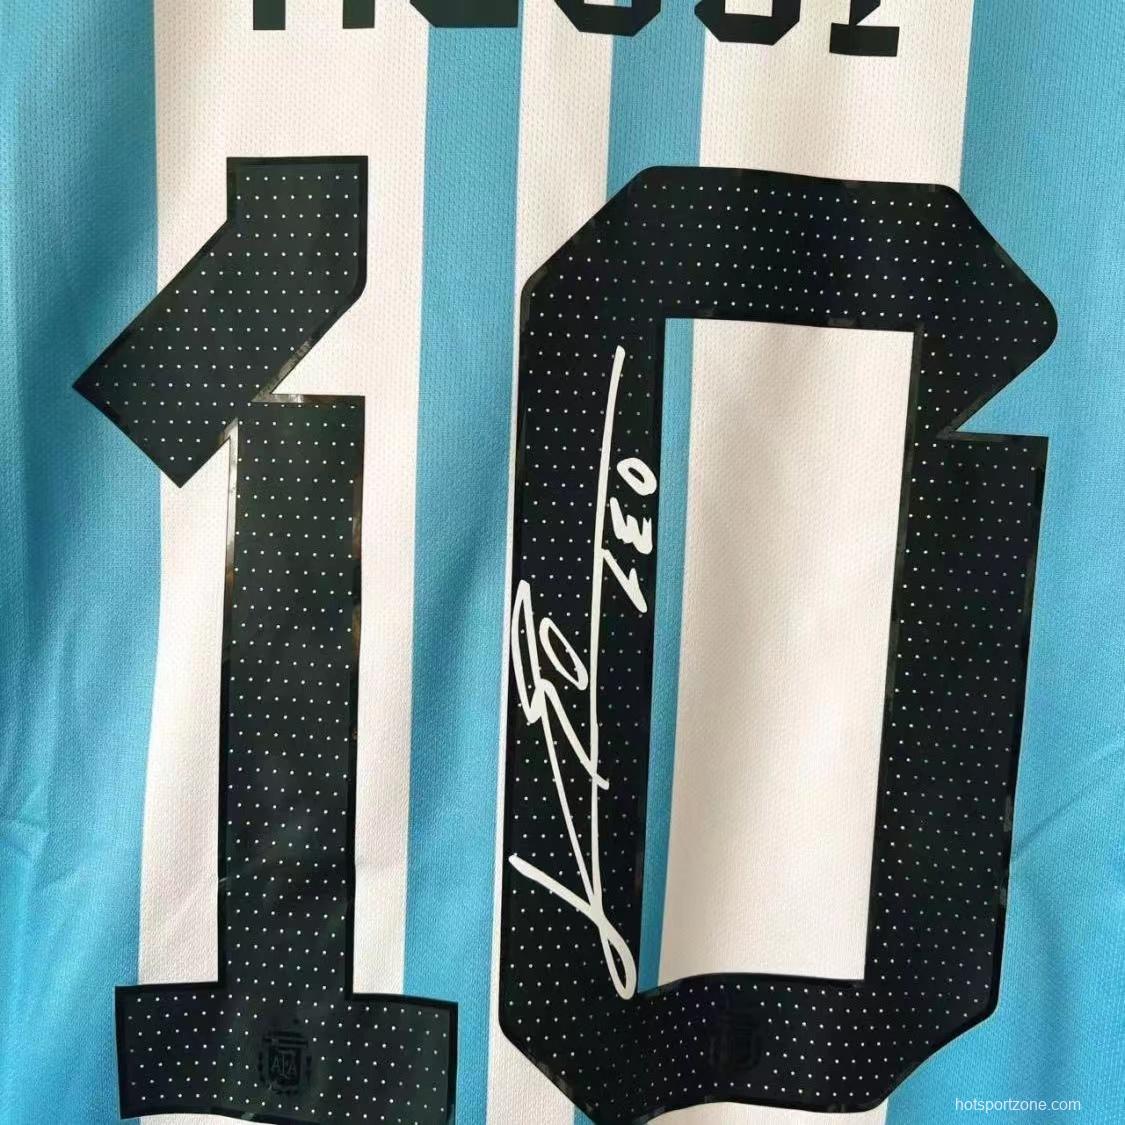 2022 Argentina Home #10 Messi Signed Signature Jersey